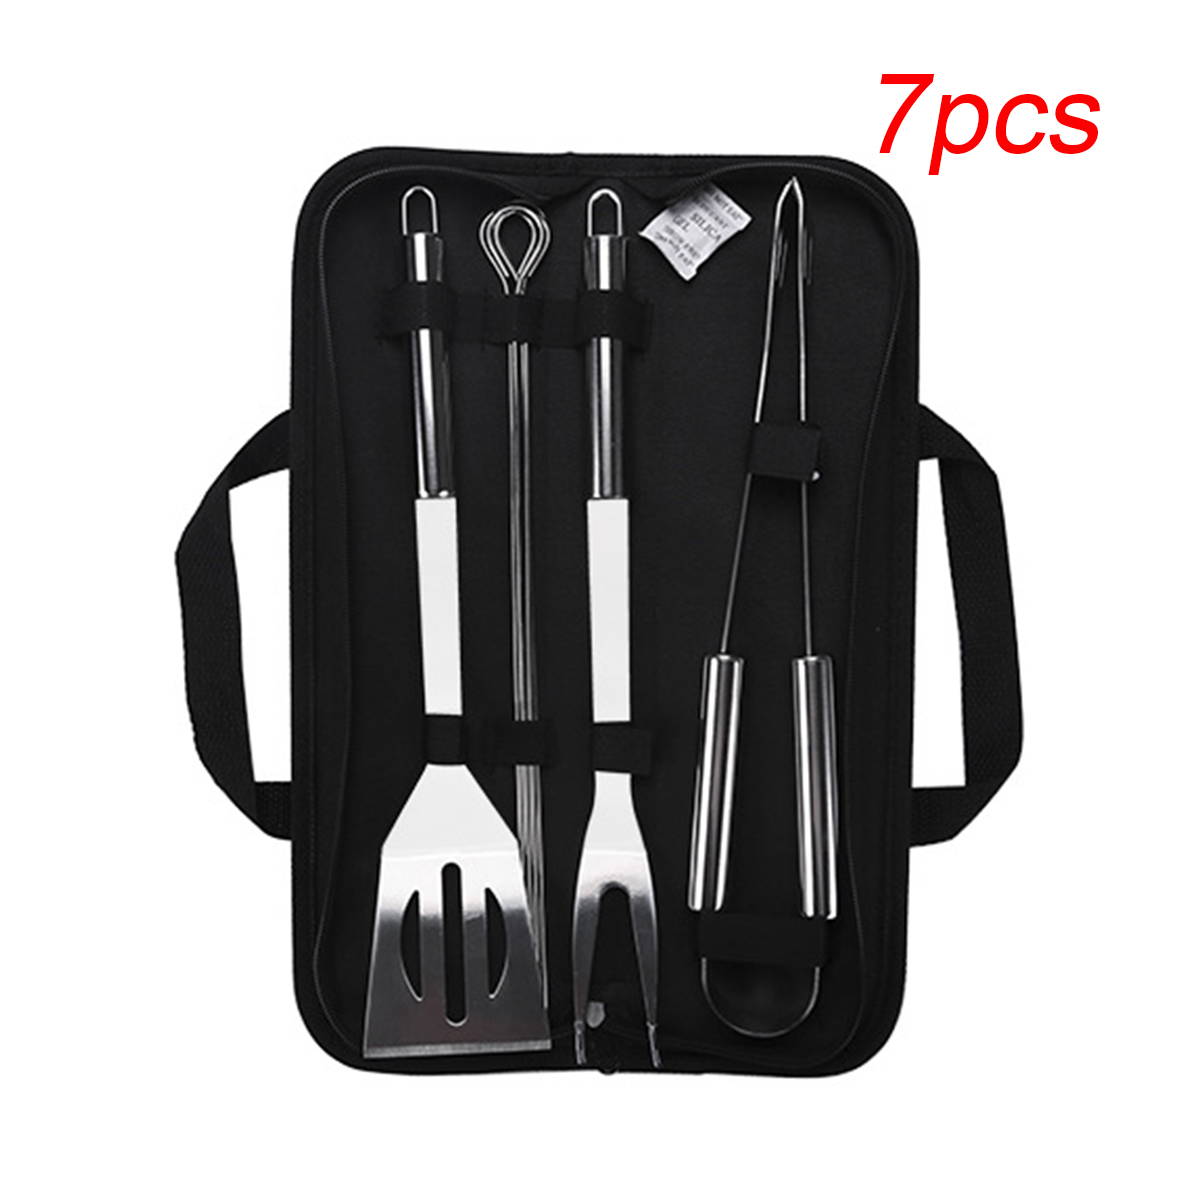 Stainless-Steel-BBQ-Tools-Set-Barbecue-Grilling-Utensil-Accessories-Camping-Outdoor-Cooking-1676473-6